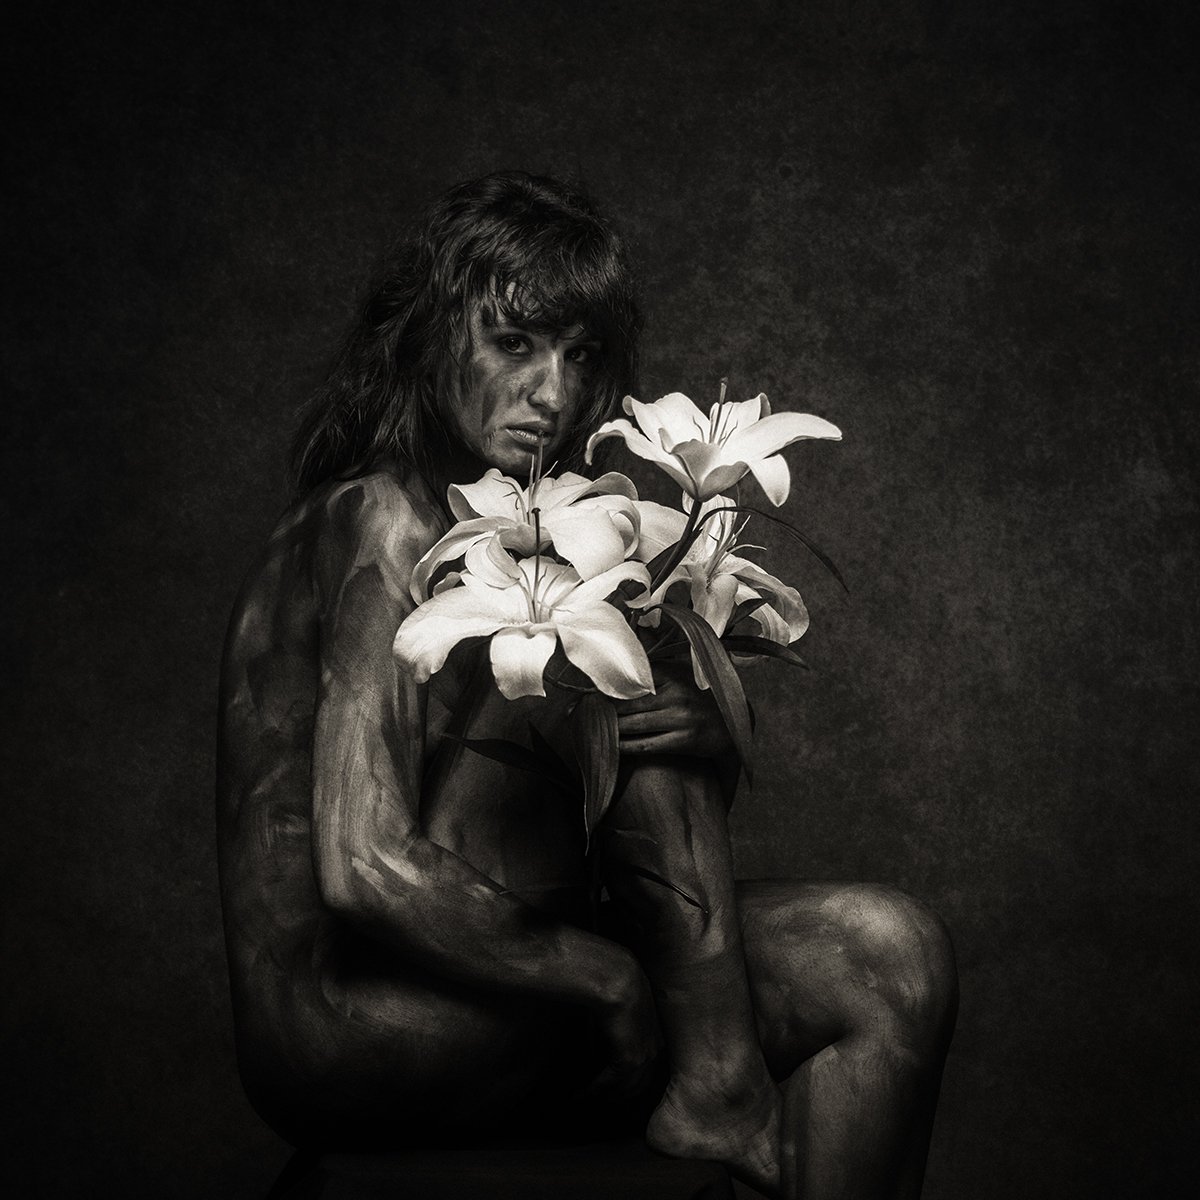 The Inmost Light - Art Nude, Limited Edition 1 of 6 by Peter Zelei